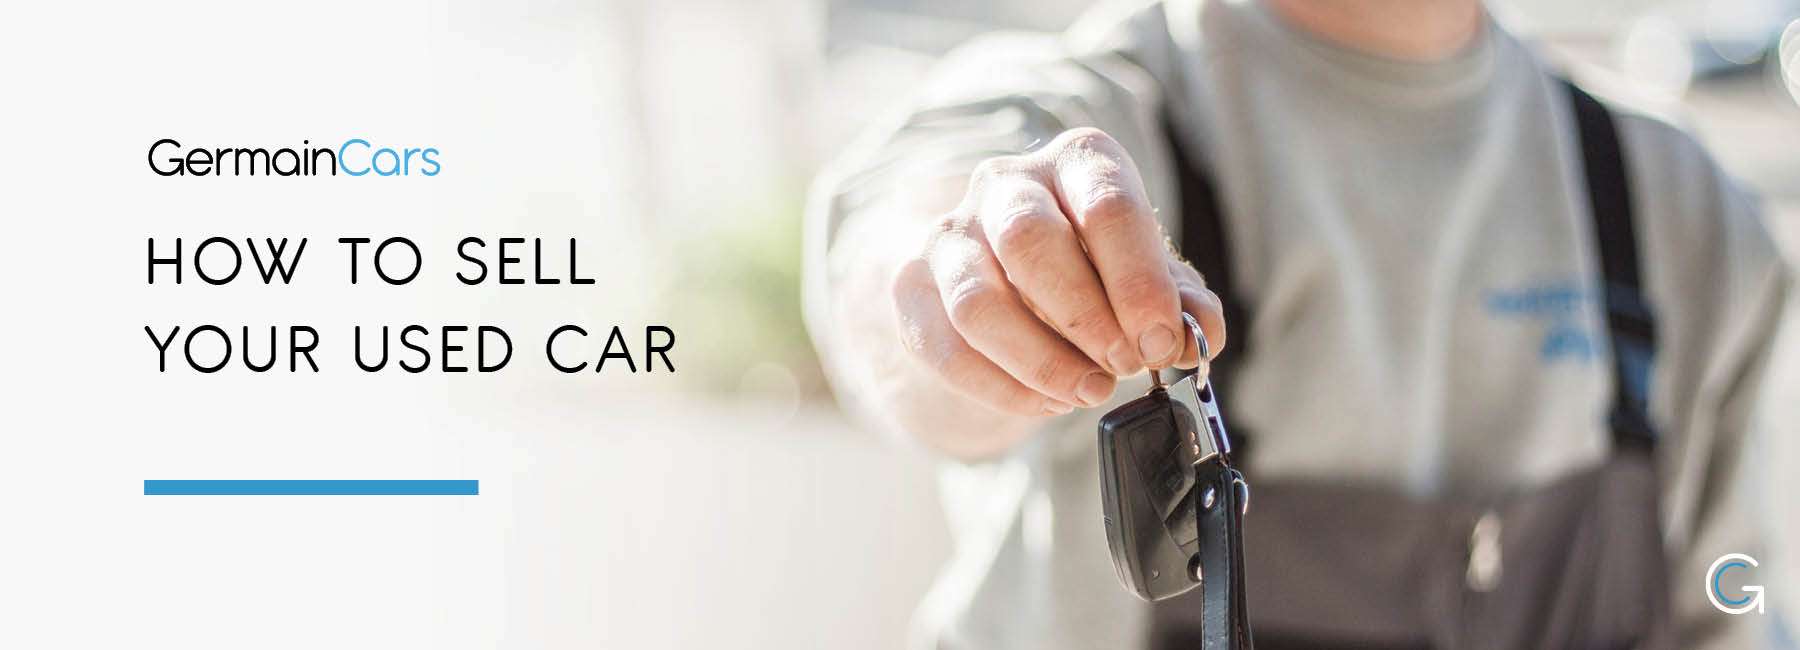 Find Out How to Sell Your Used Car for Cash - Germain Cars Group Site